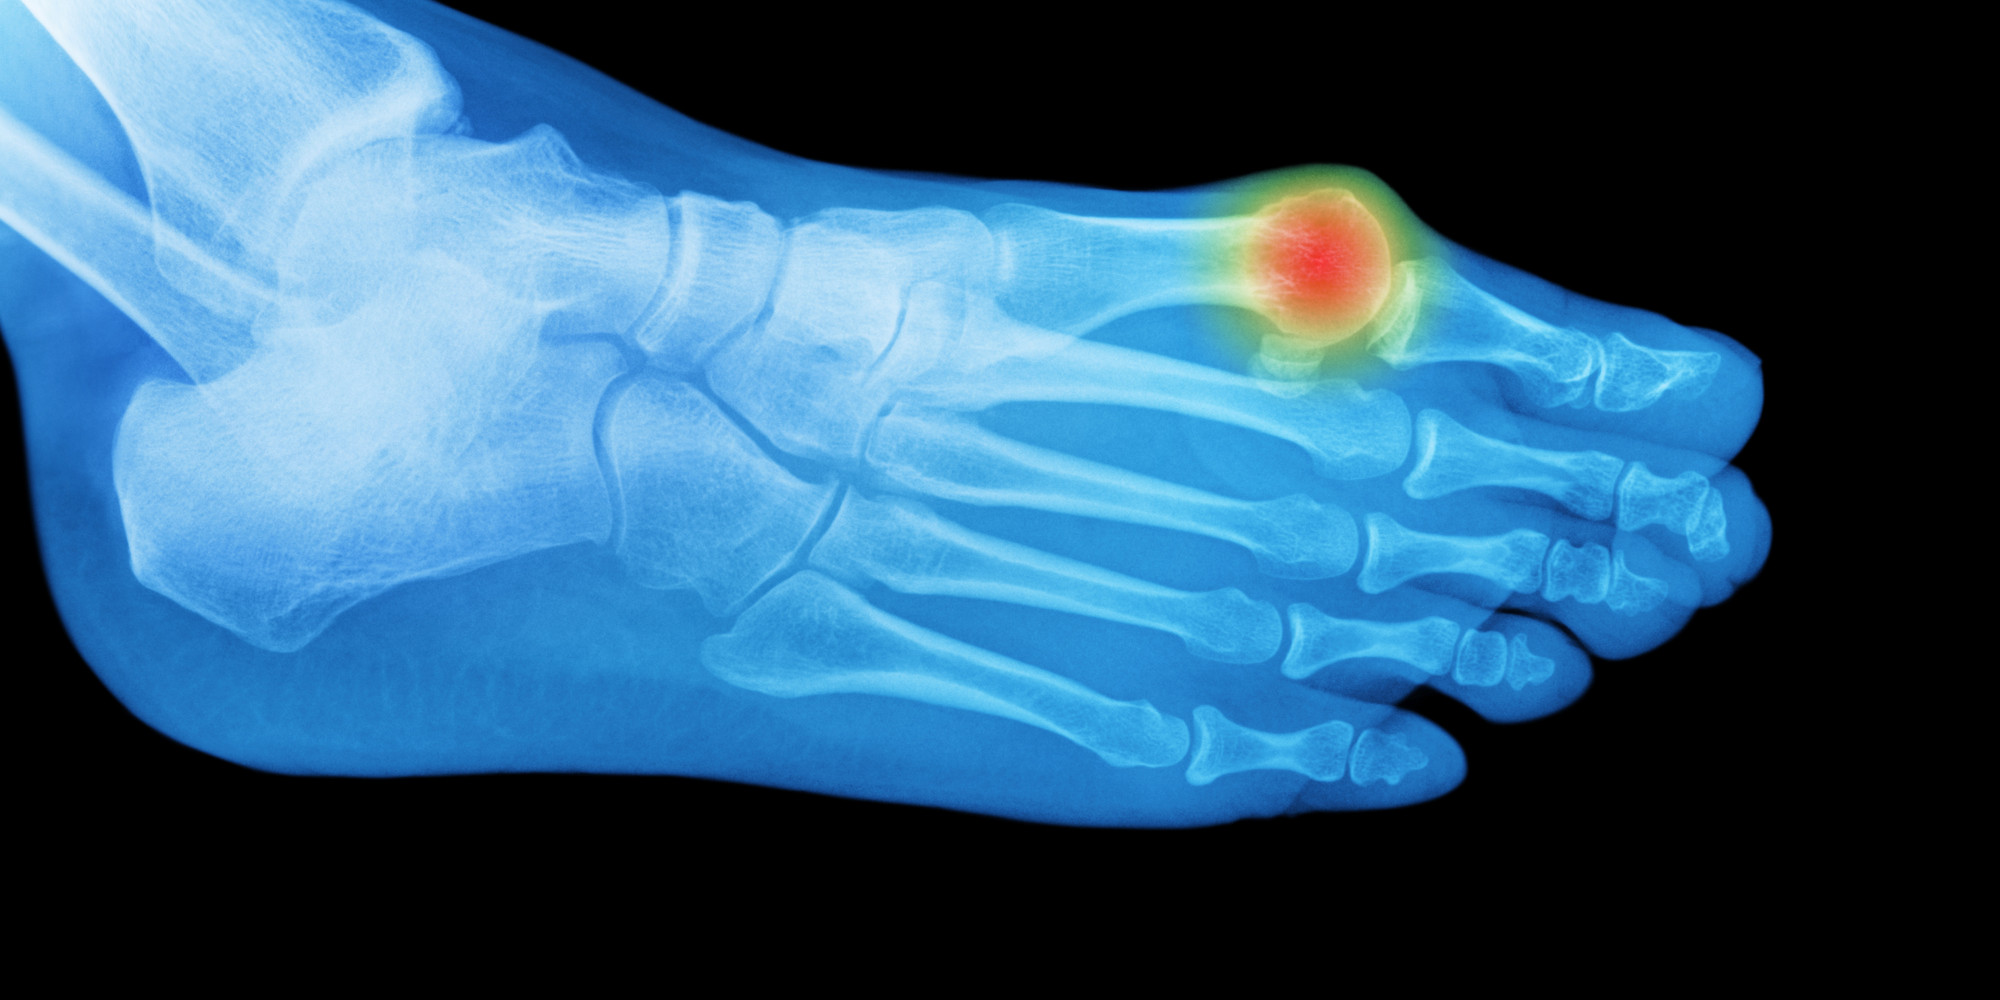 Bunions May Be Hereditary, Study Finds